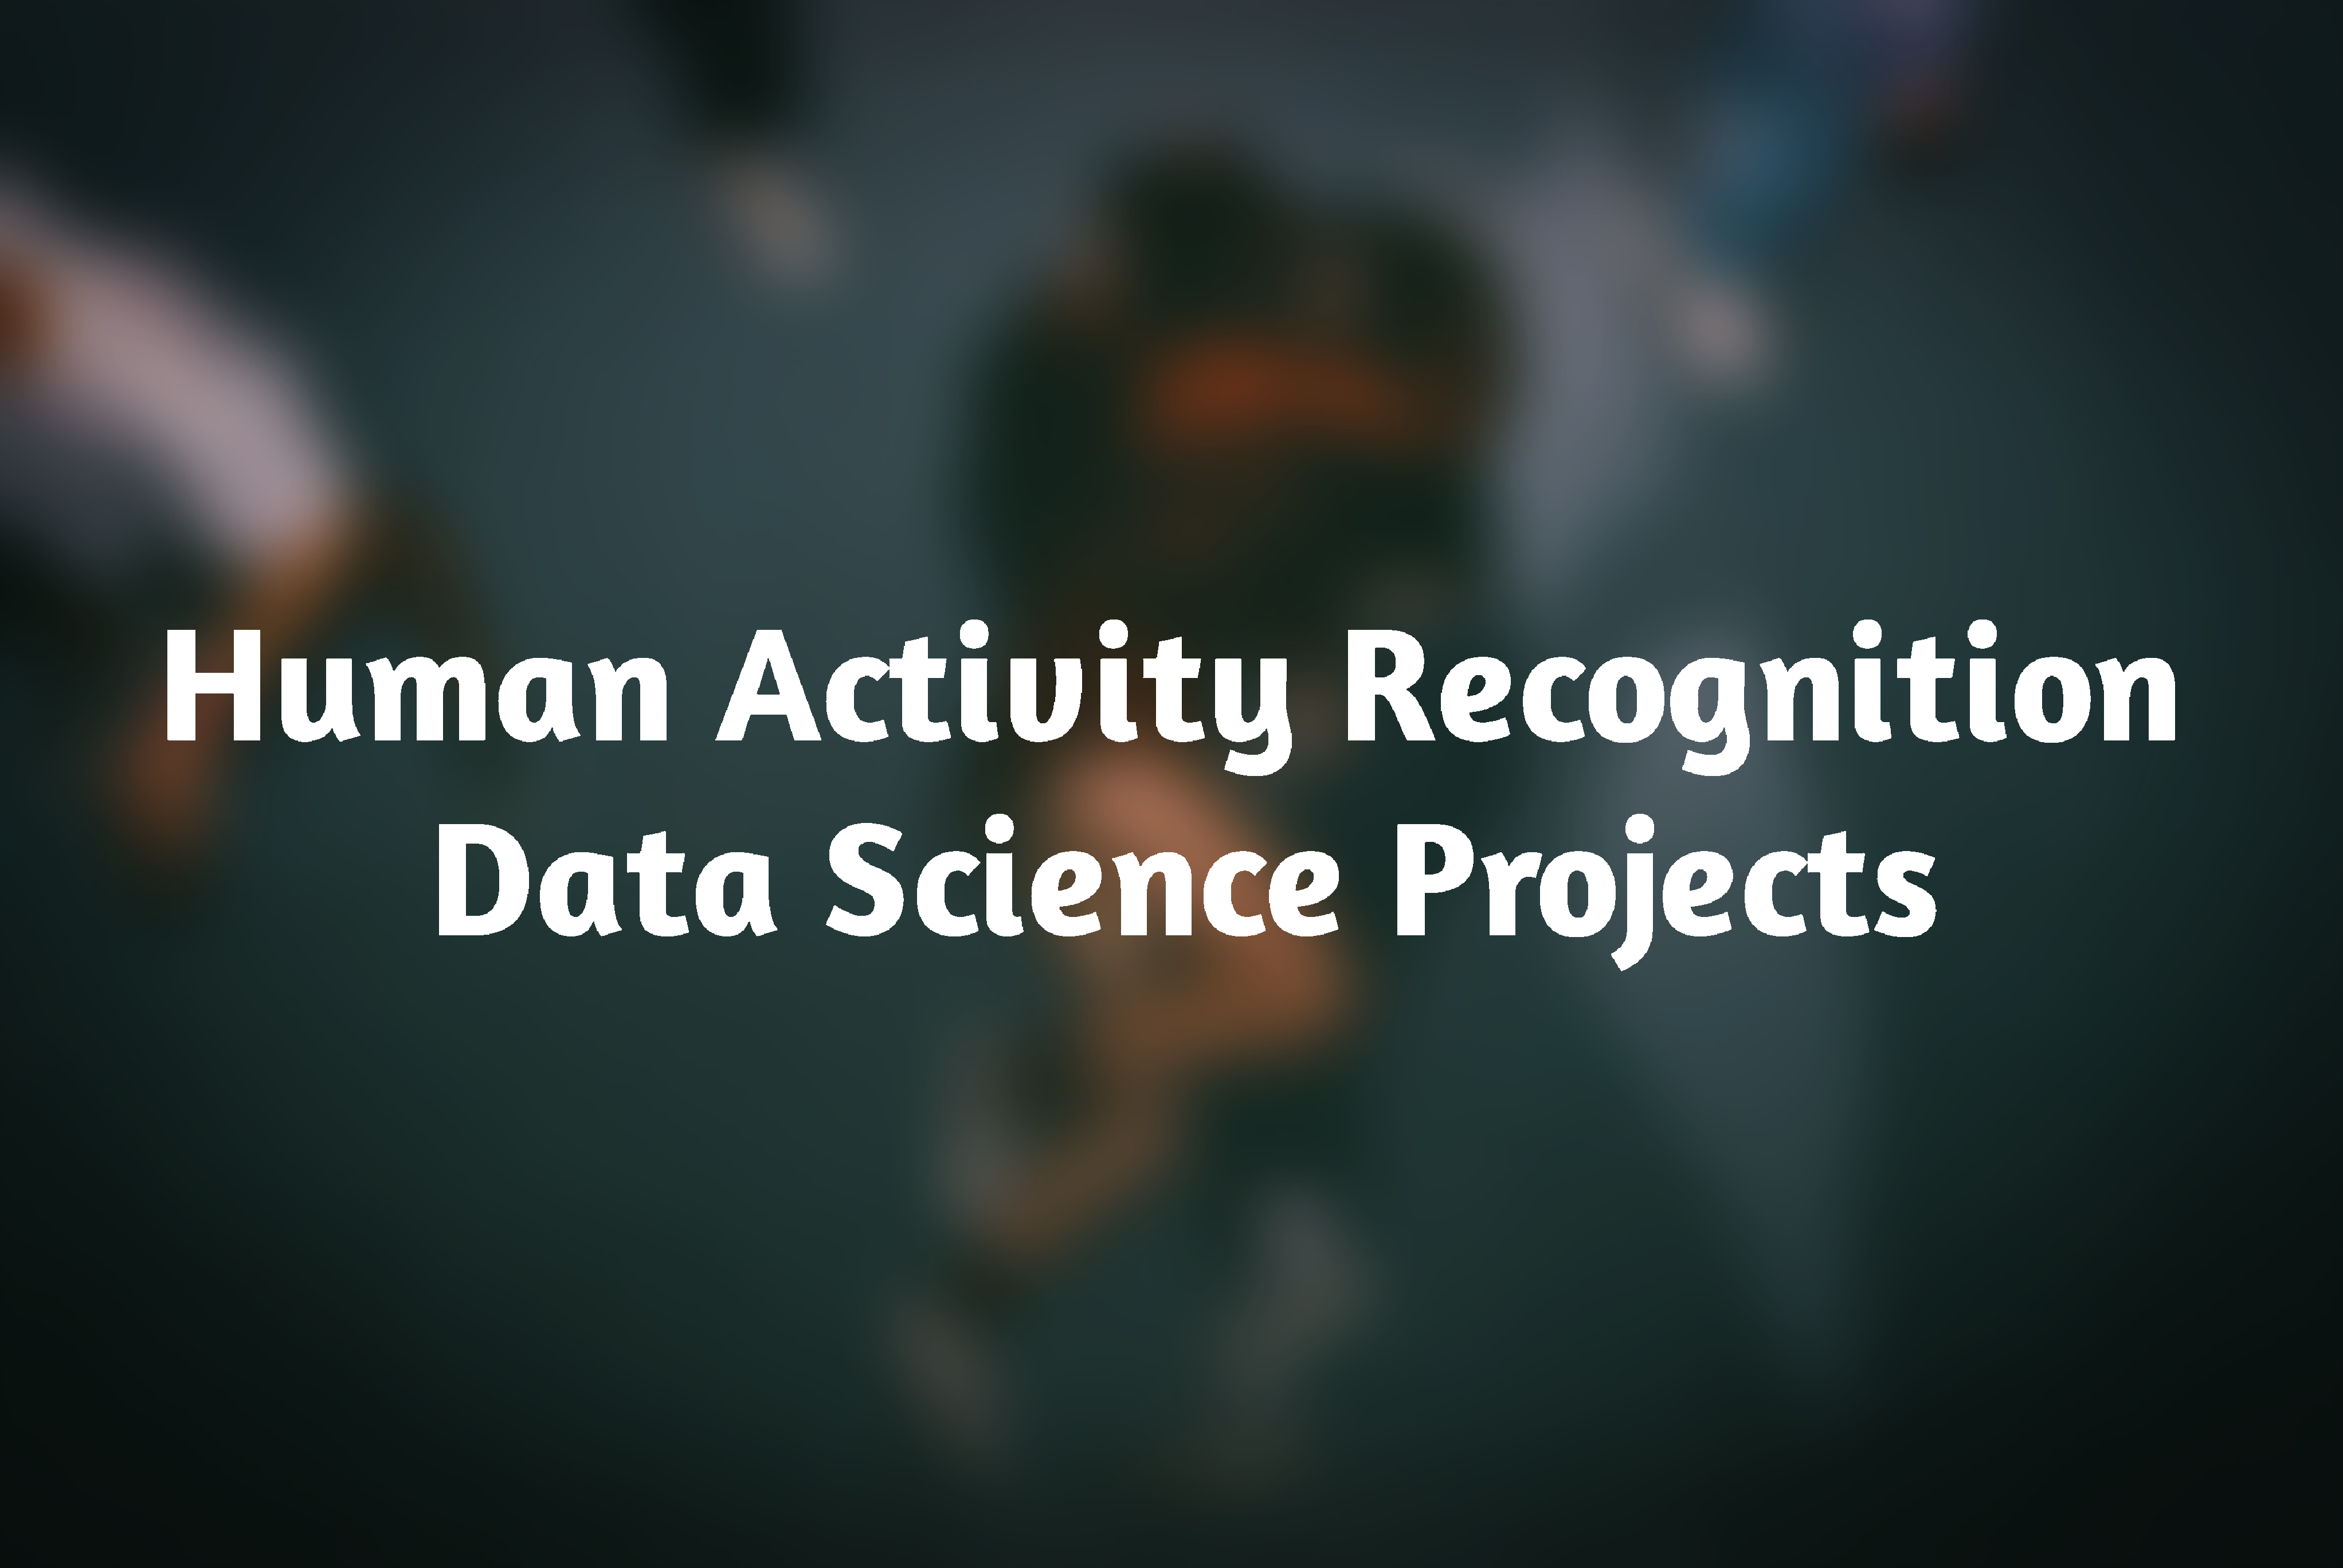 Human Activity Recognition - Data Science Projects